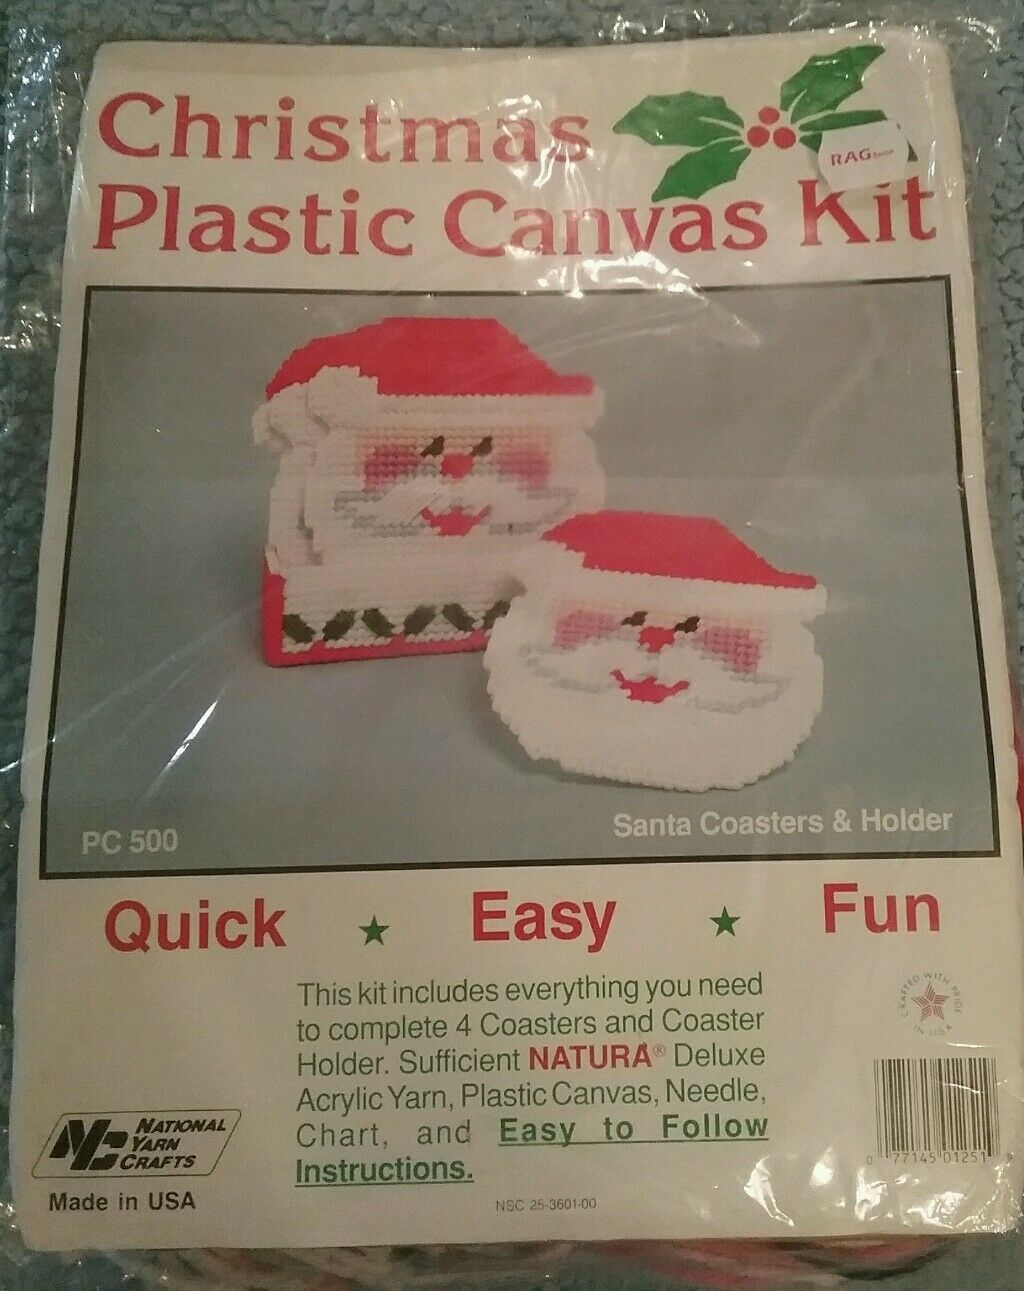 Primary image for Christmas Plastic Canvas Kit Pc500 Santa Coasters&Holder National Yarn Crafts